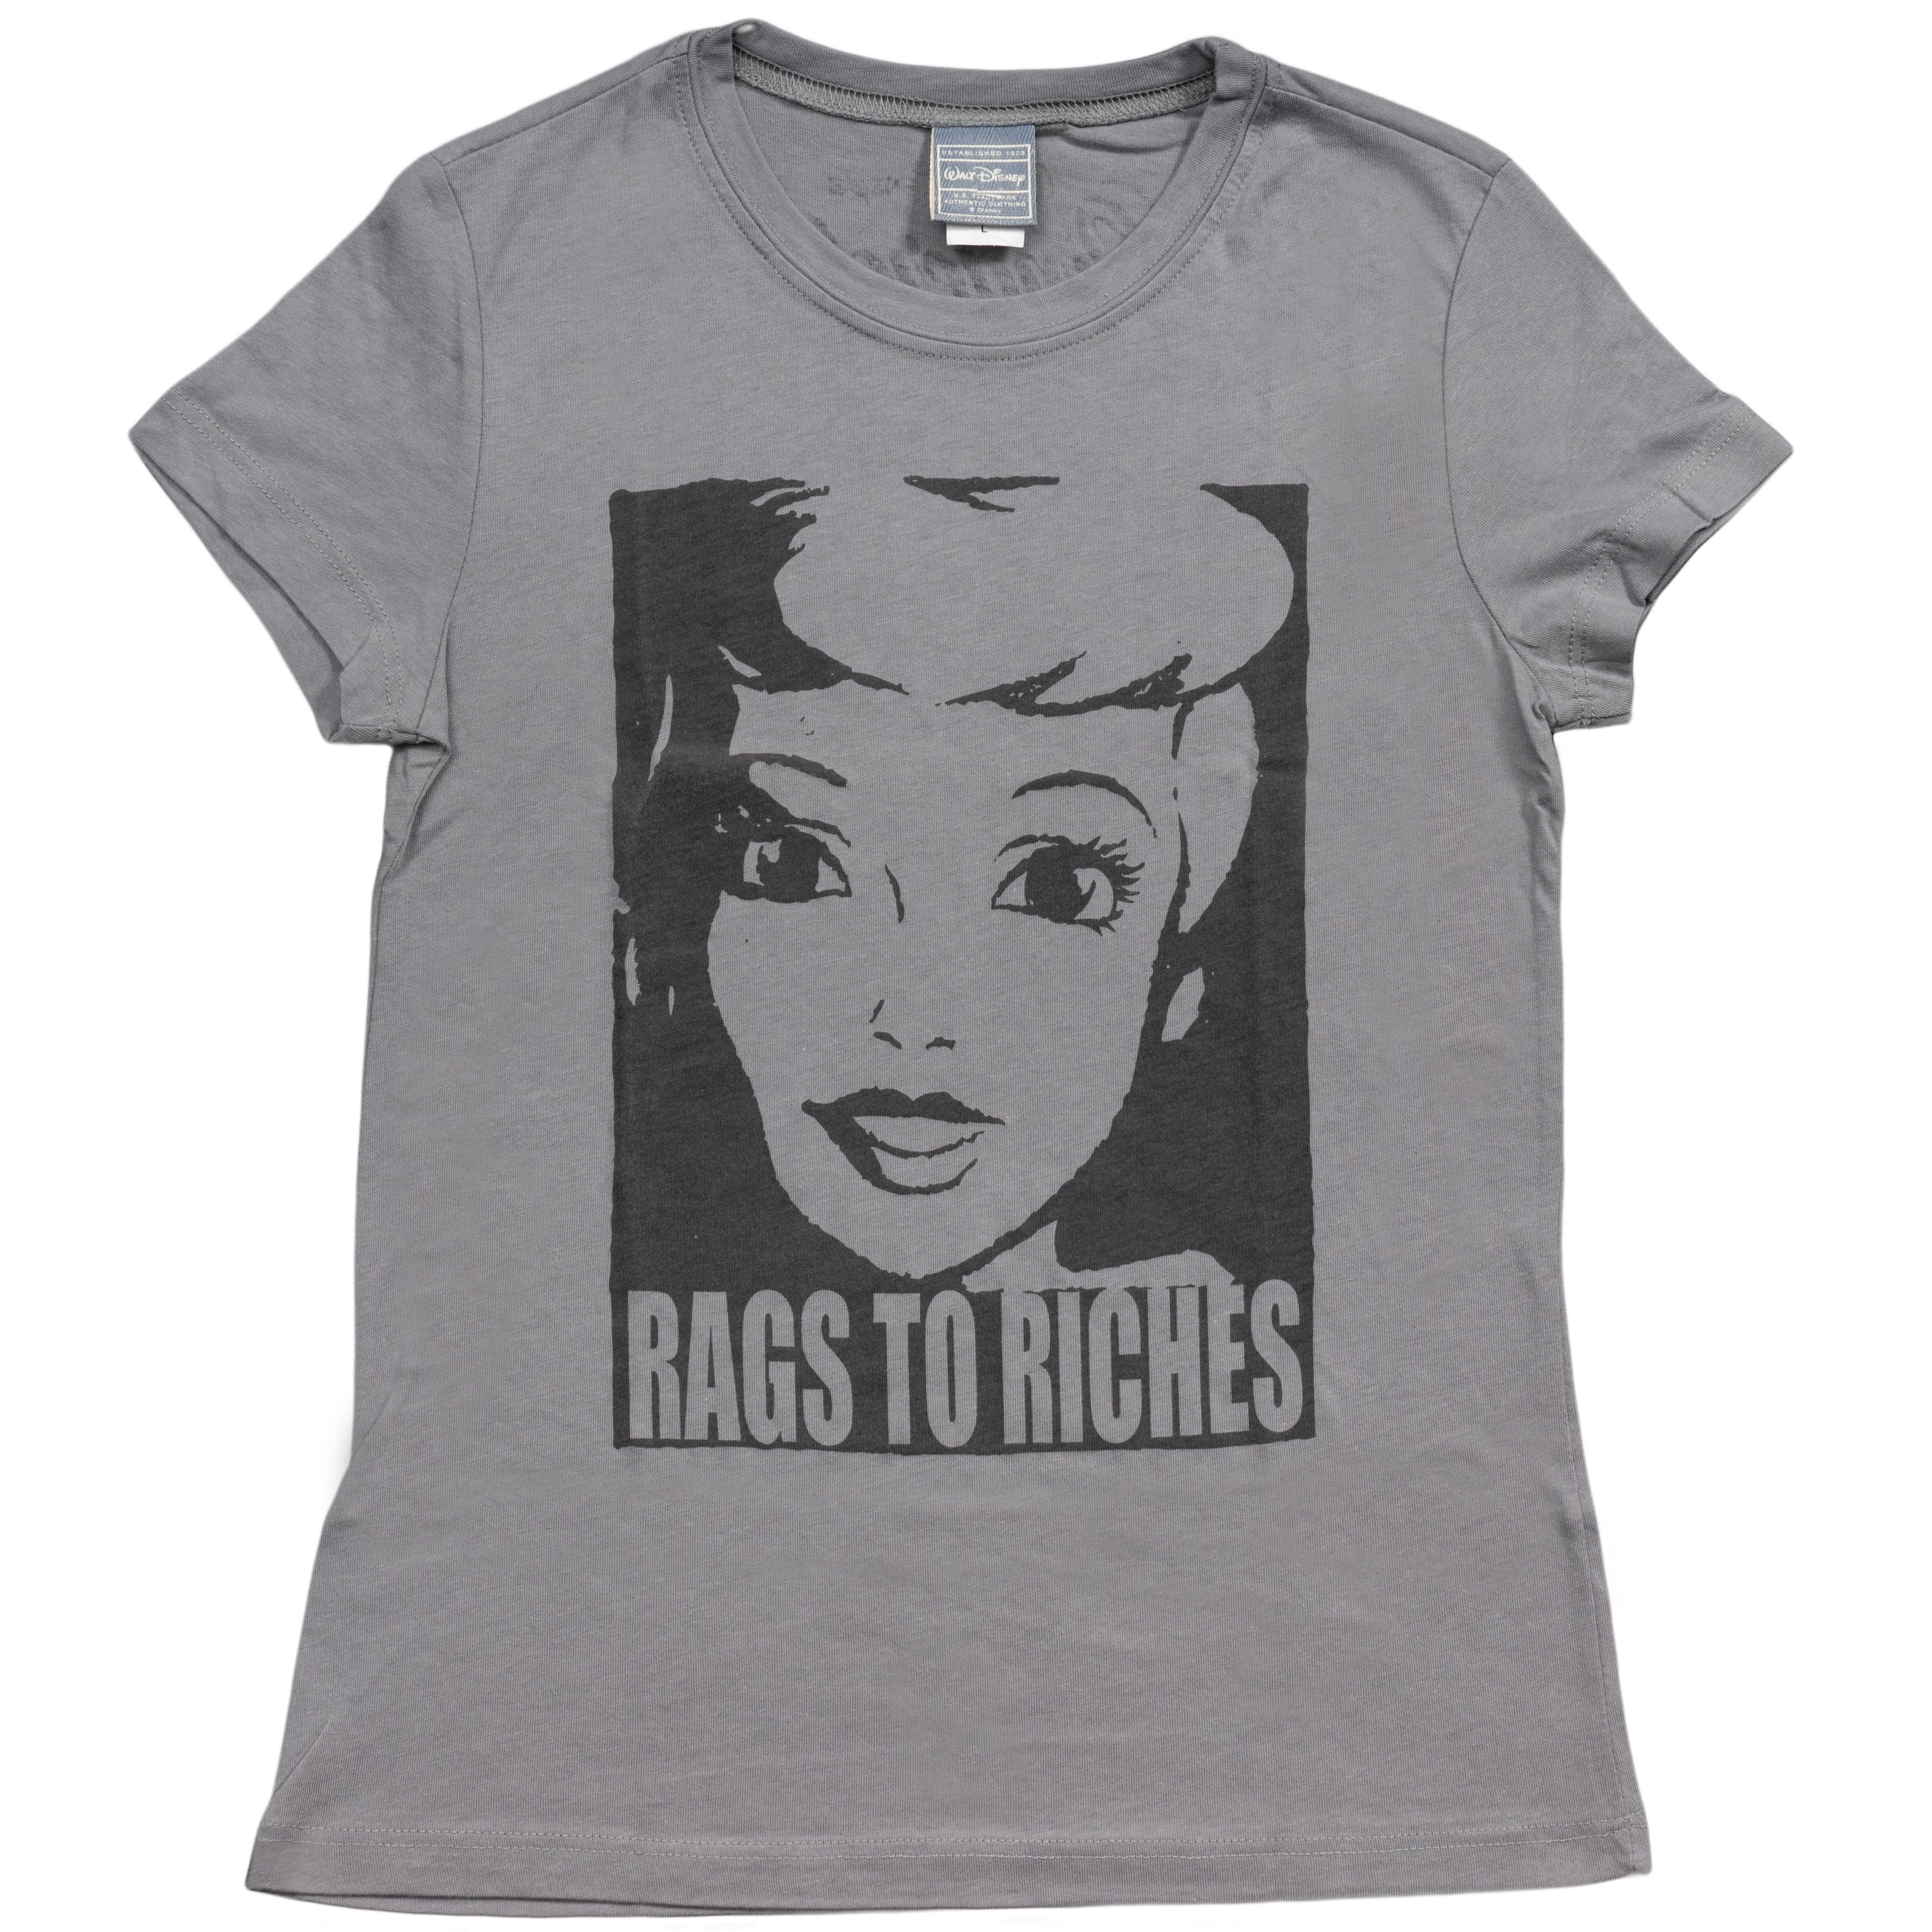 Rags to Riches Gray Juniors/Ladies T-shirt